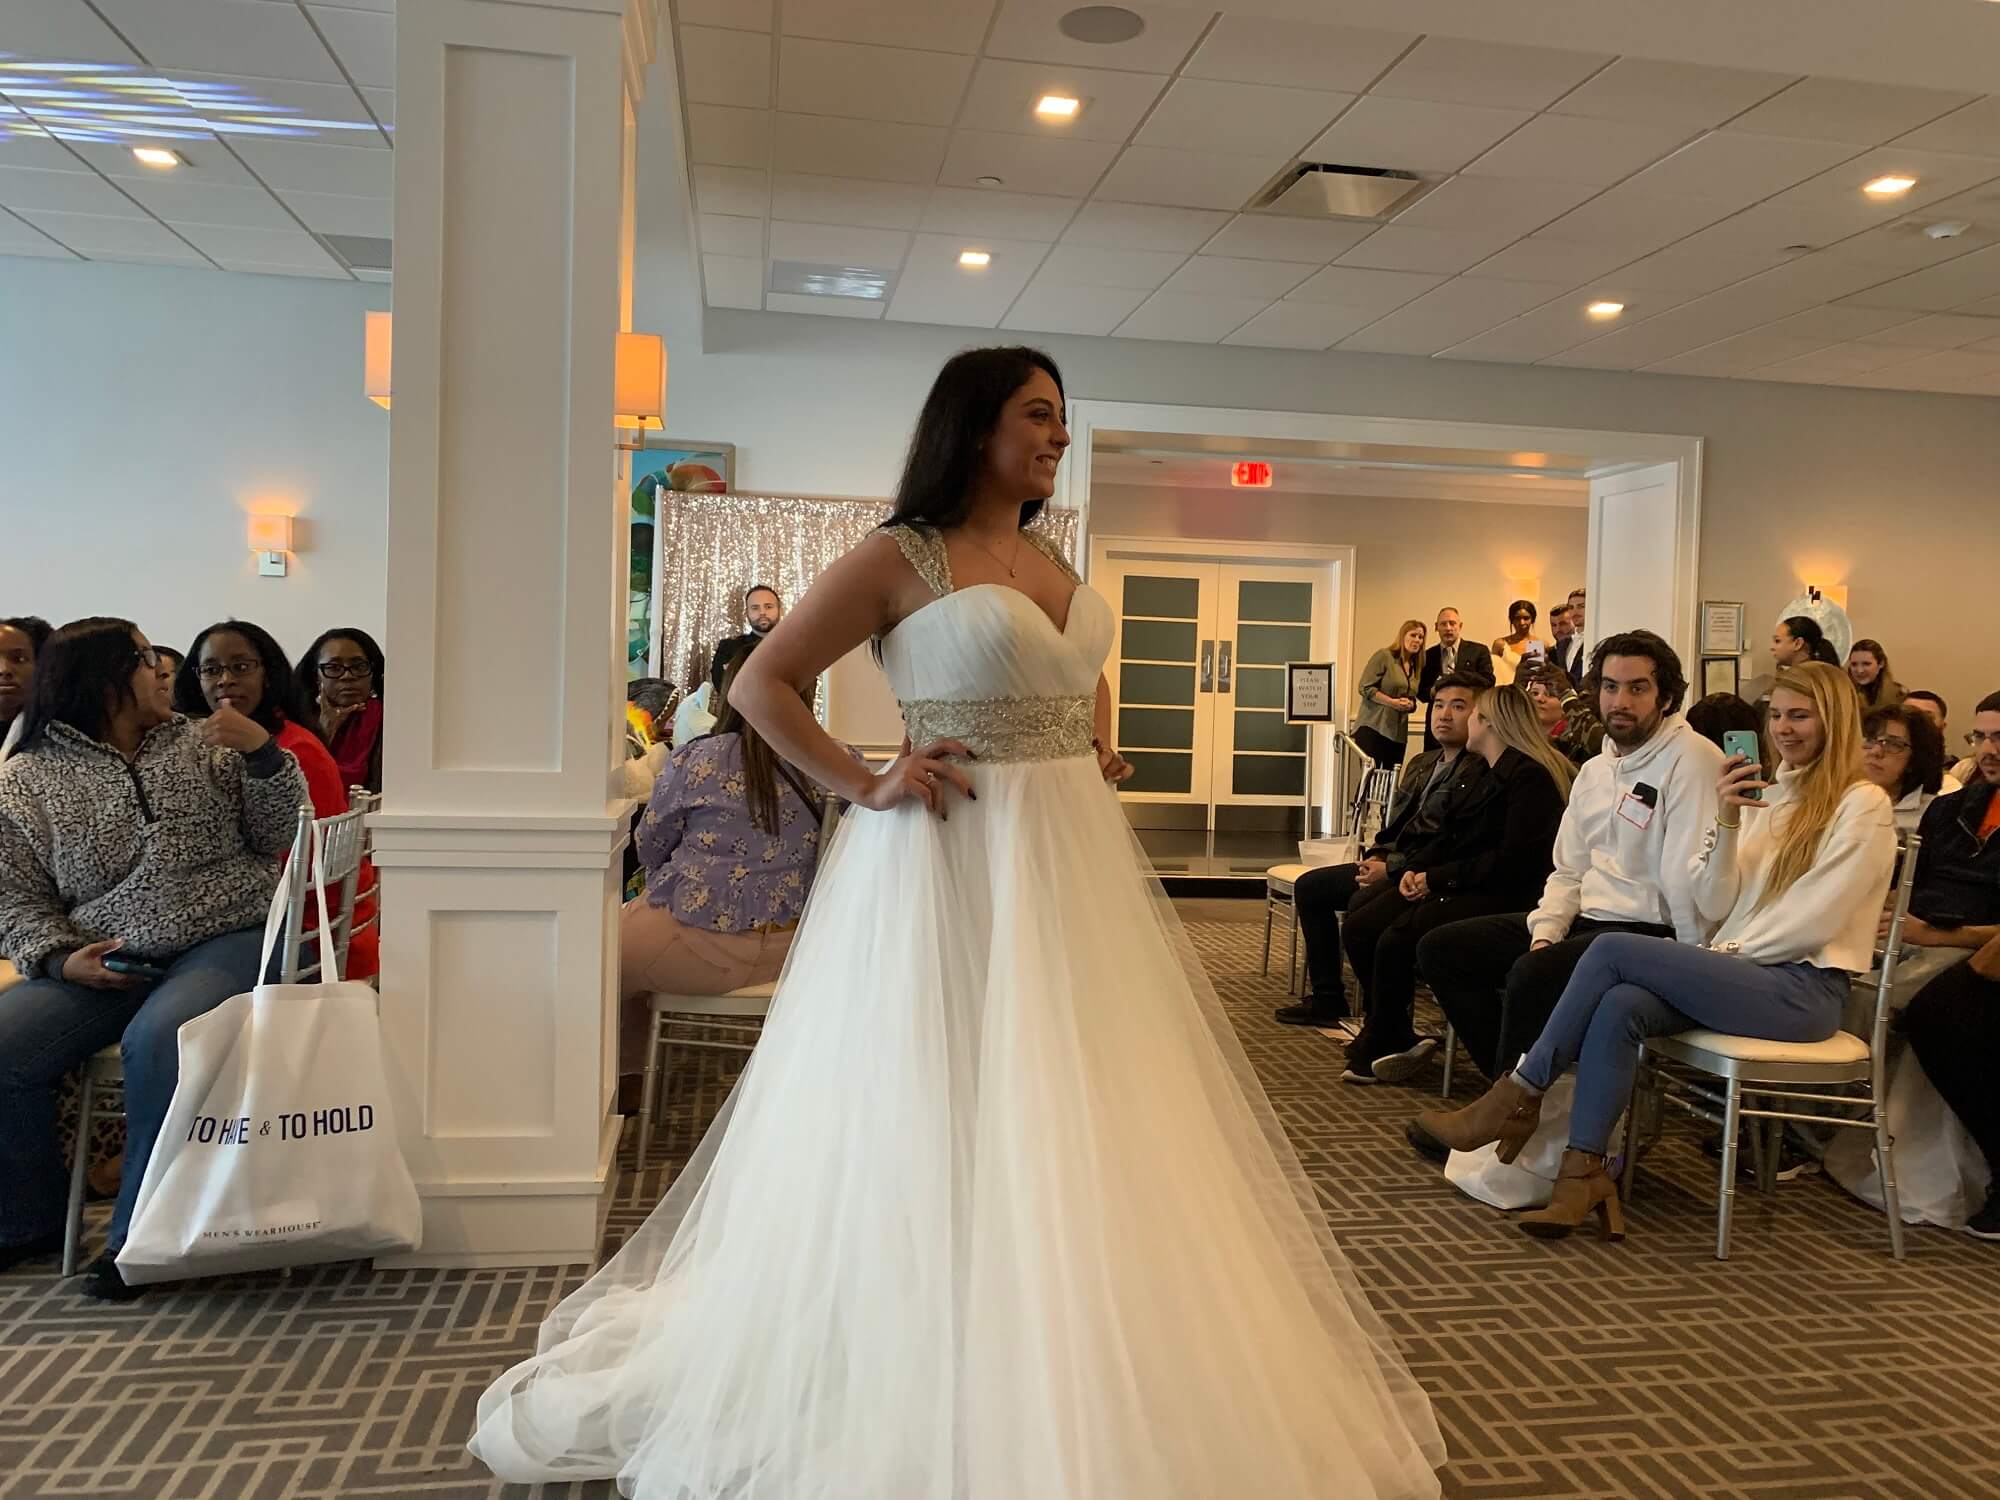 “Whatever makes you happy, it’s there.” See the industry’s top wedding professionals at the Long Island Bridal Expo